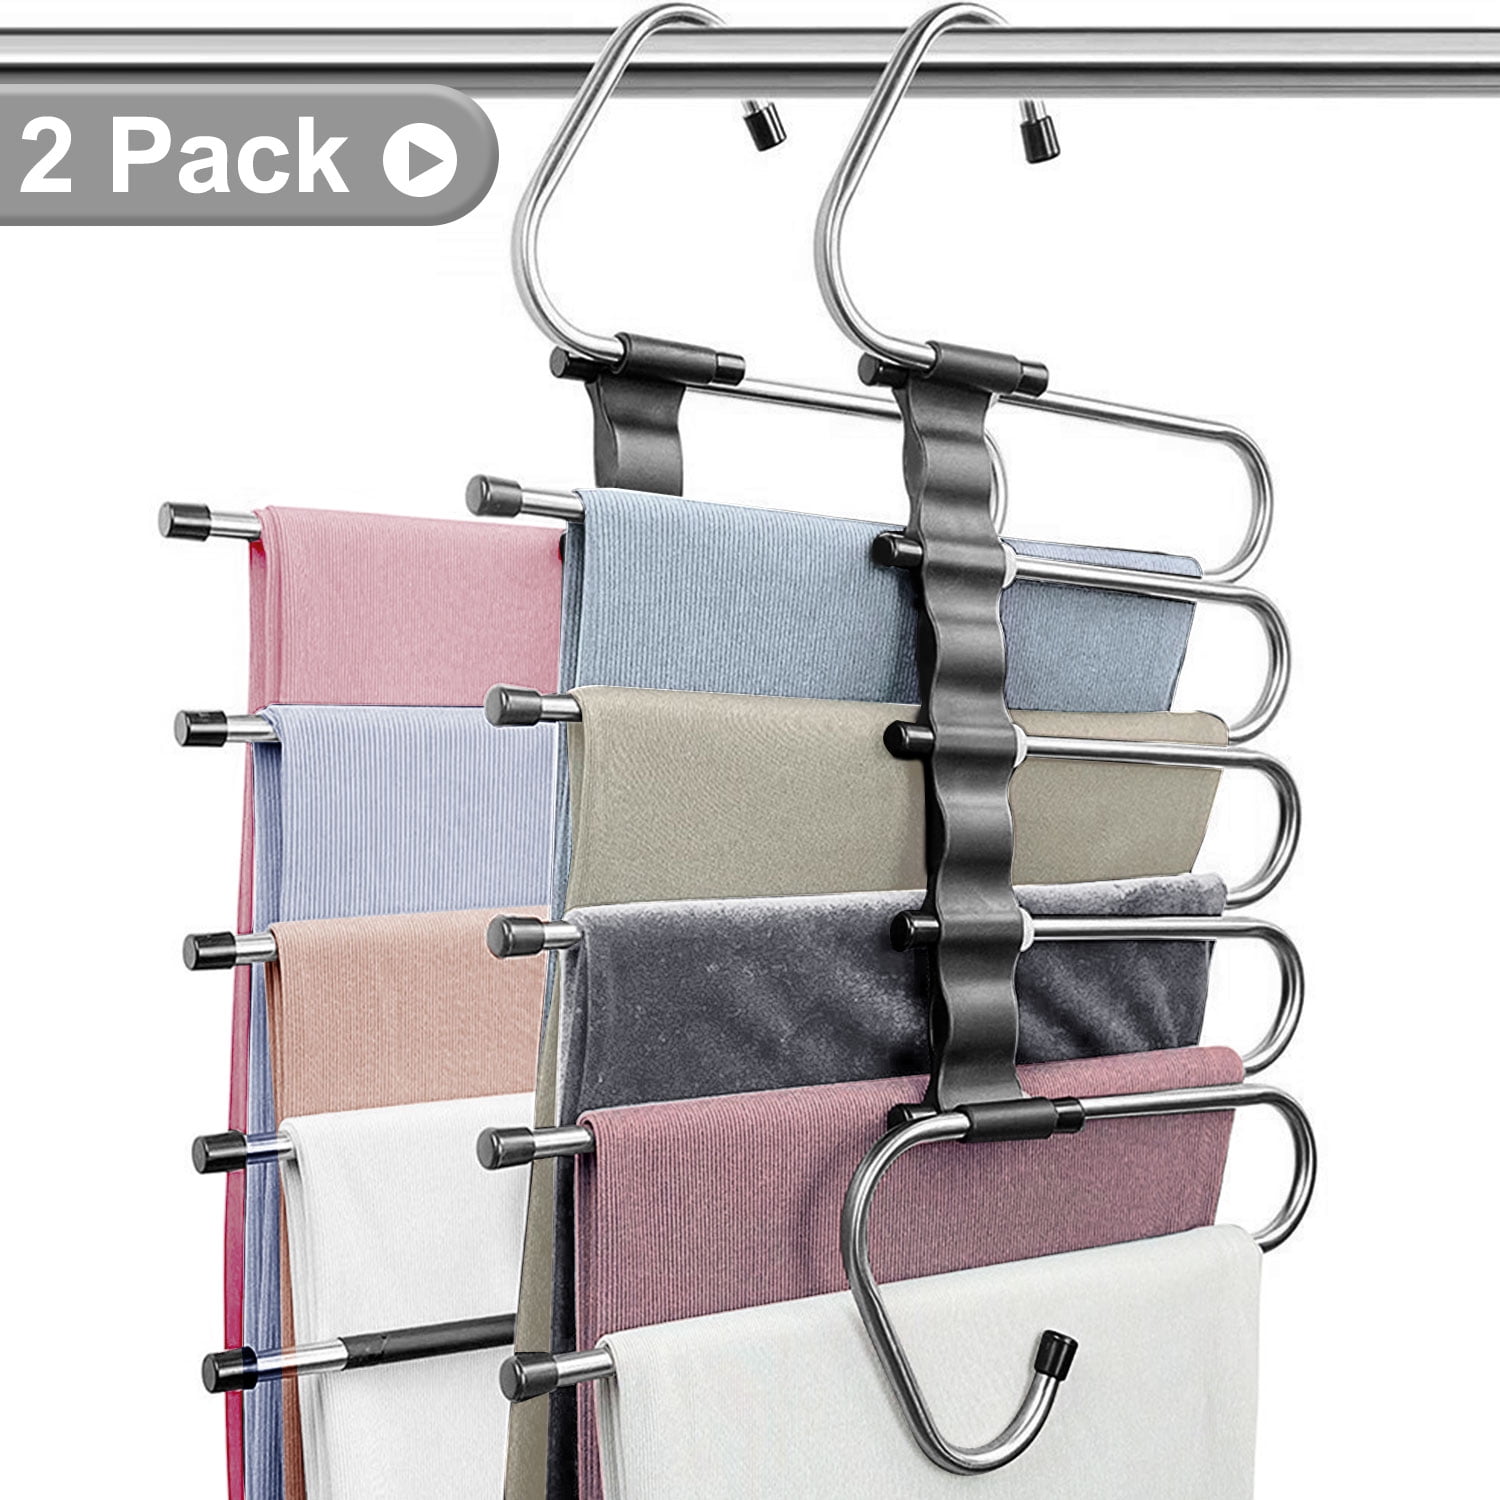 HouseKe 2-Piece Magic Pants Hangers, Space Saving Closet Hangers 5 Layers 2  Uses Multi Functional Pants Rack,Clothes Organizer Rack for Clothes